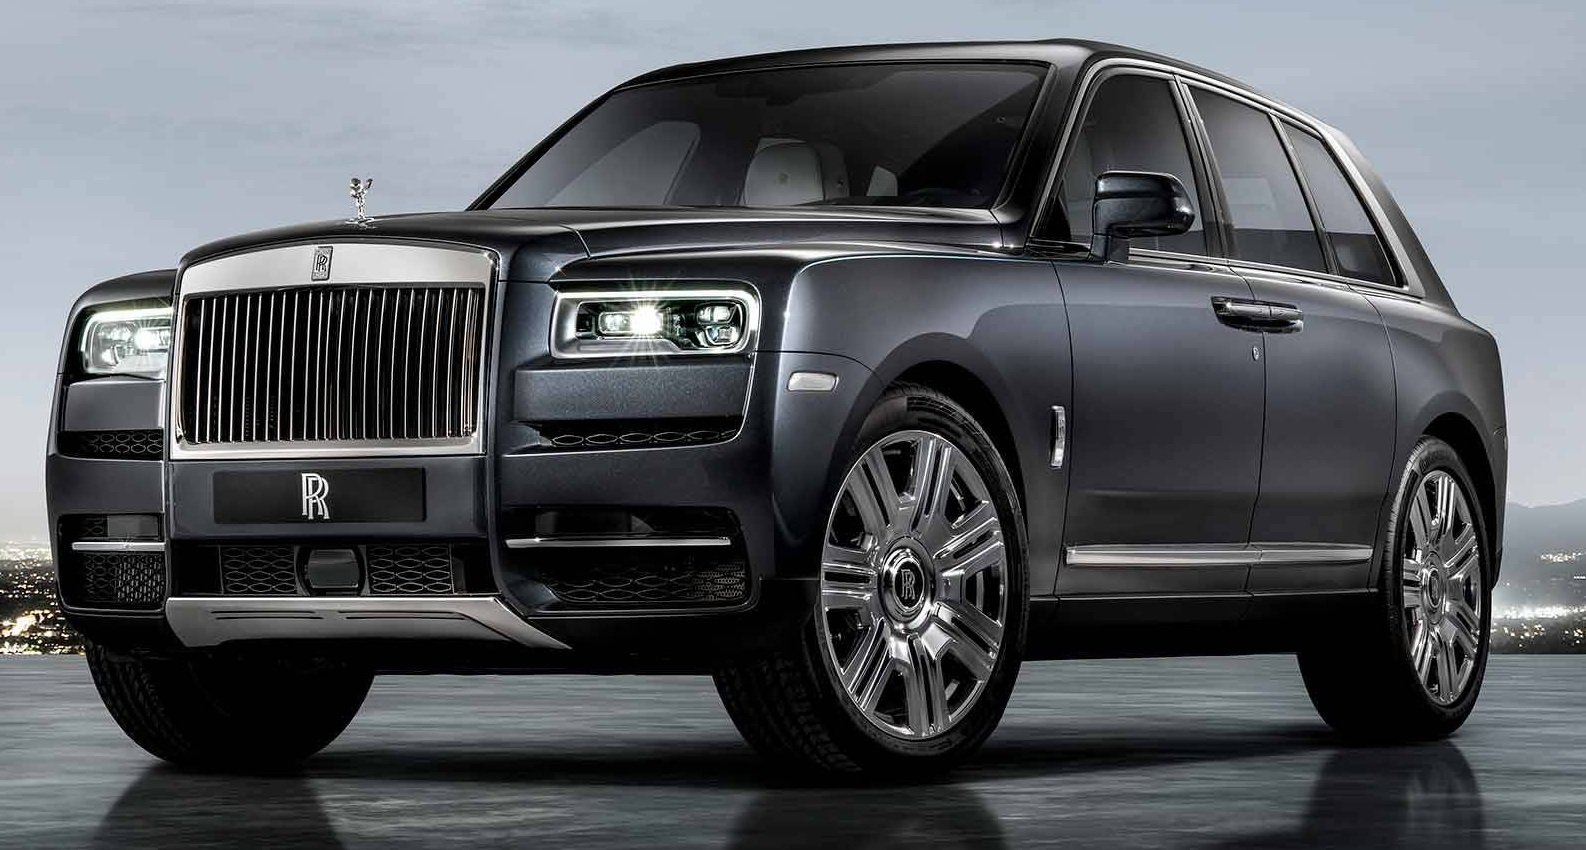 15 Most Expensive Cars in India - Rolls Royce Cullinan